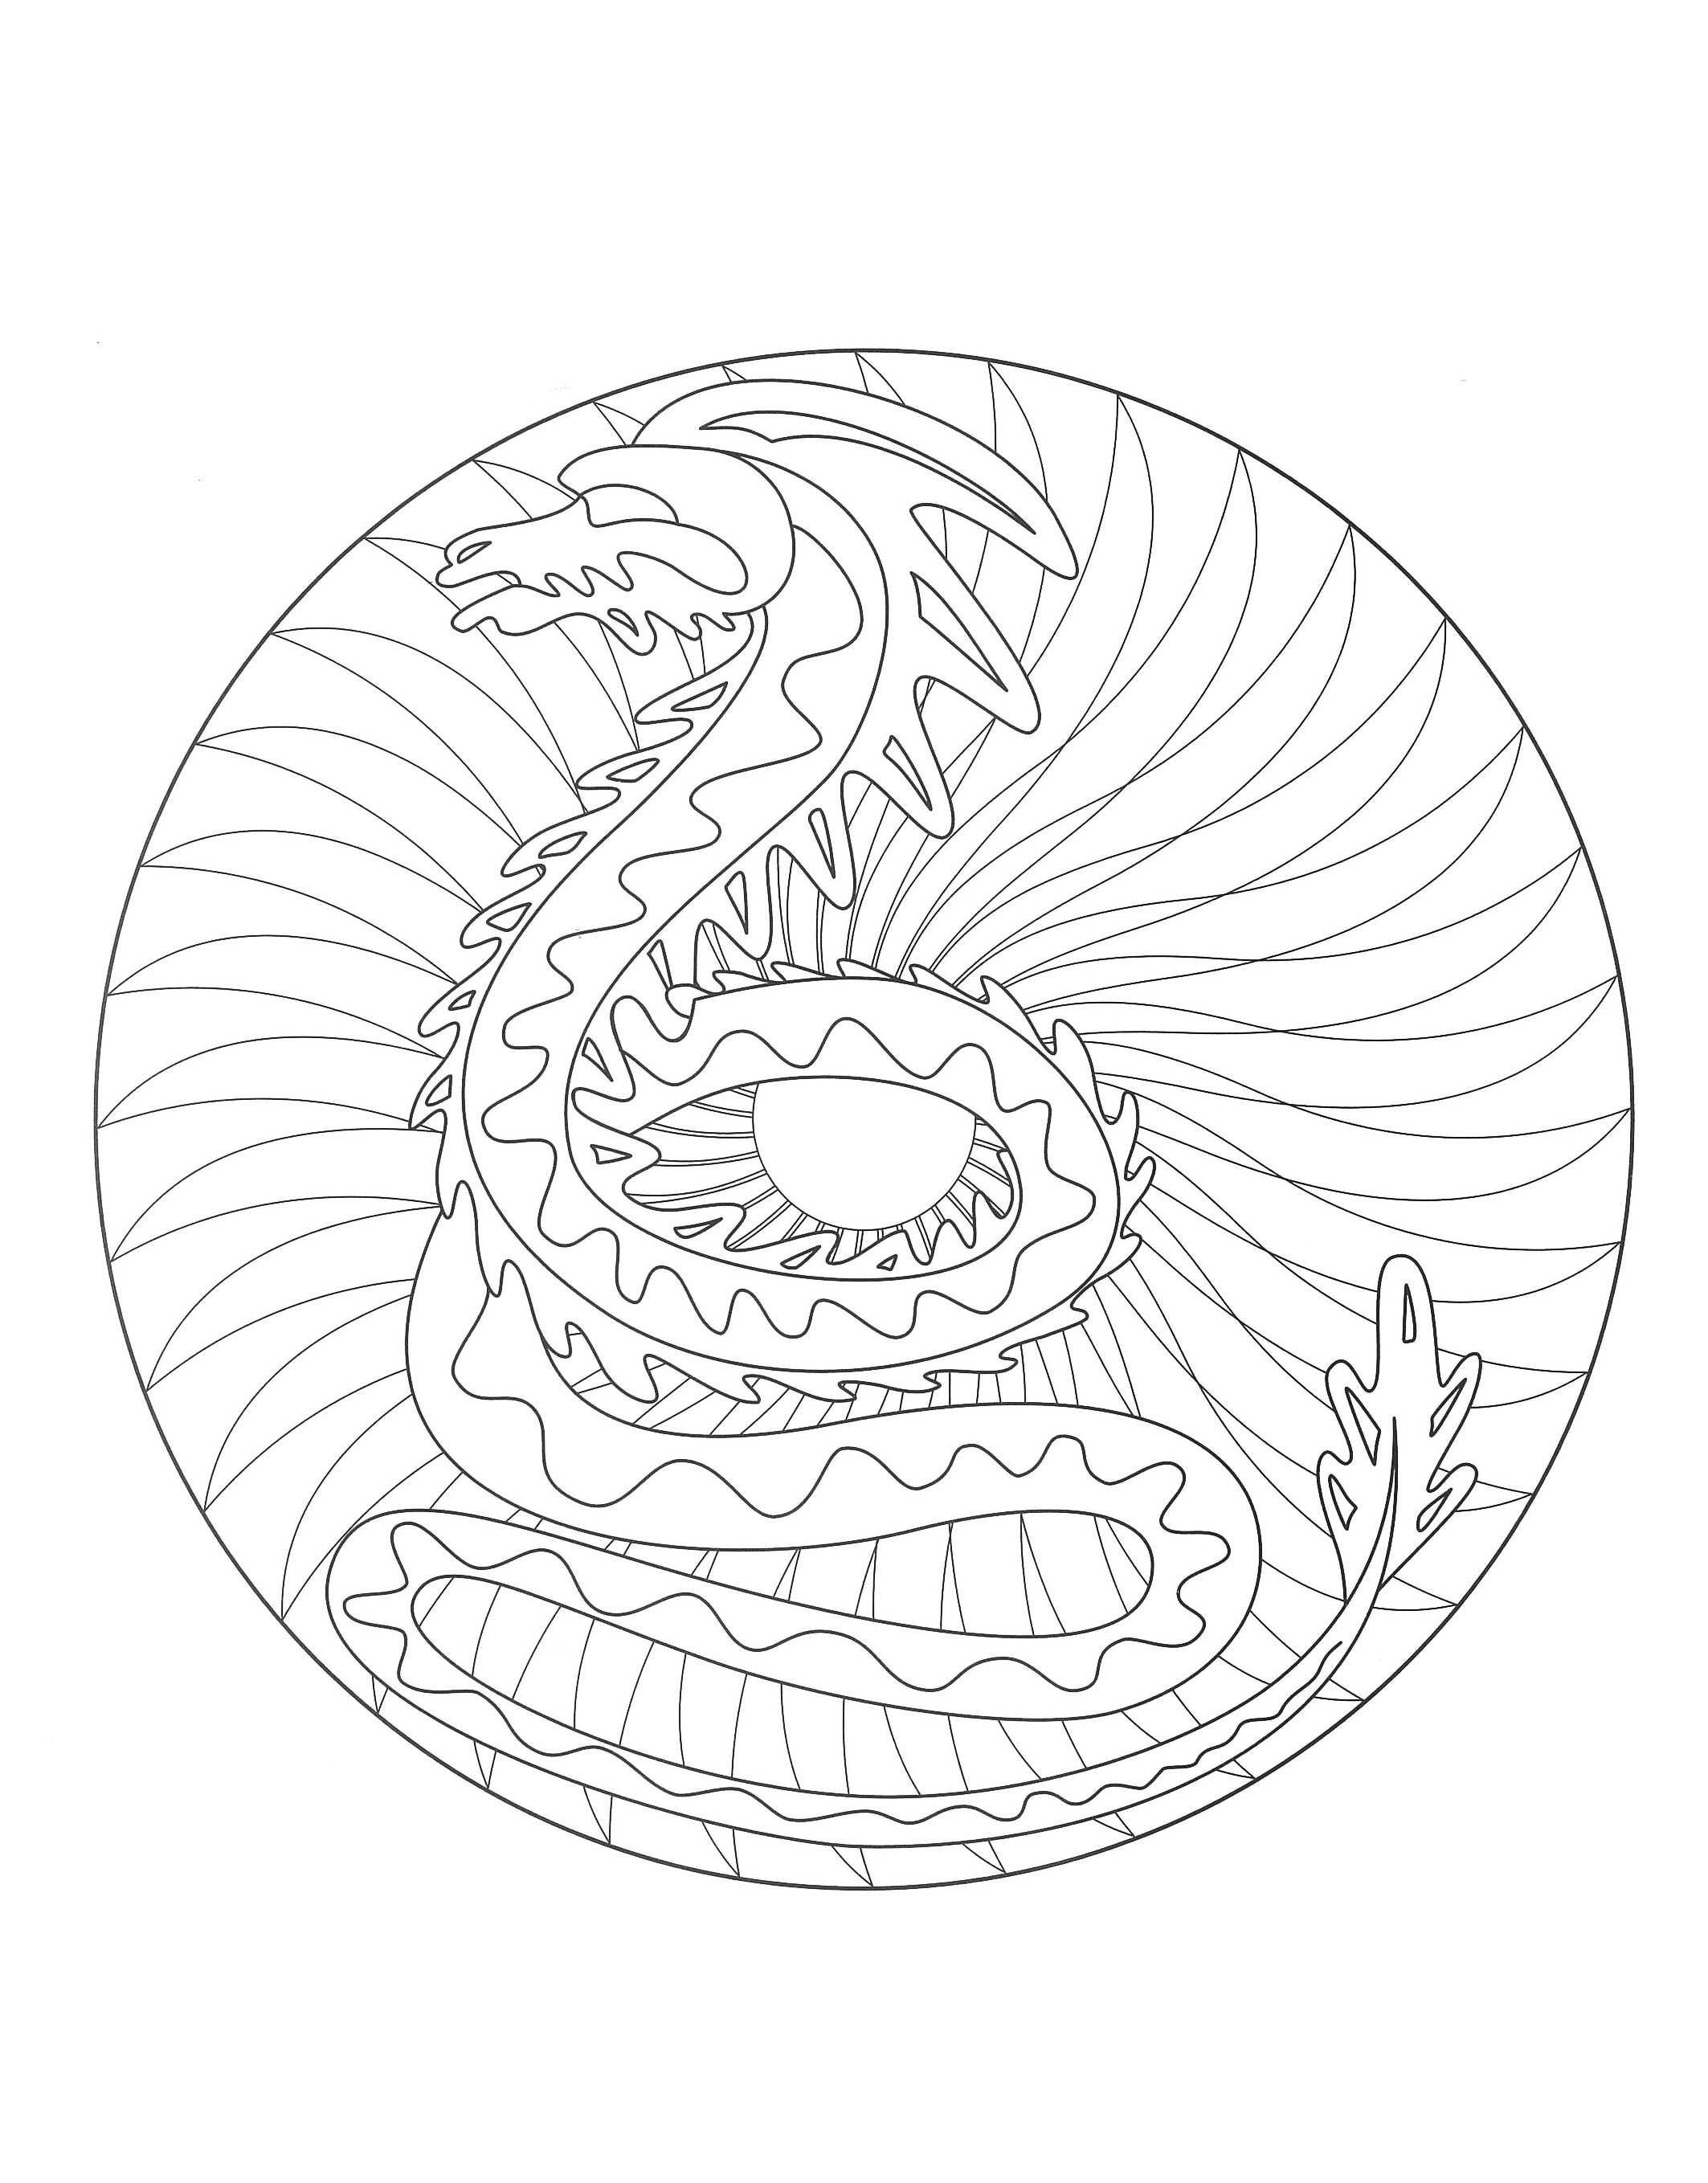 Free Dragon Mandala Coloring page. If you are ready to color during a long time, get ready to color this incredible Mandala coloring page ... You can use the colors you prefer.